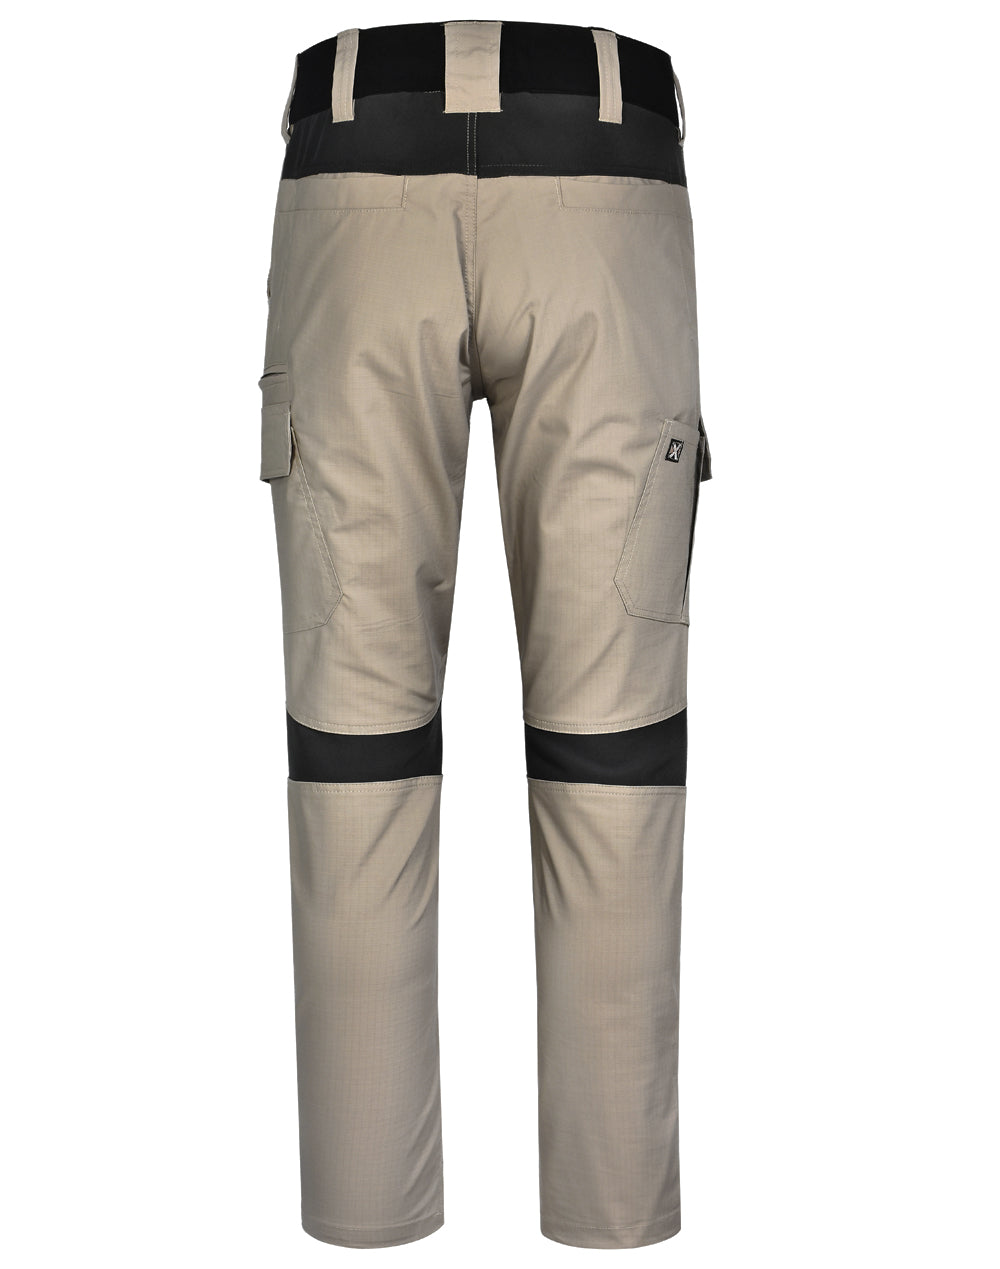 AIW WP24 UNISEX RIPSTOP STRETCH WORK PANTS